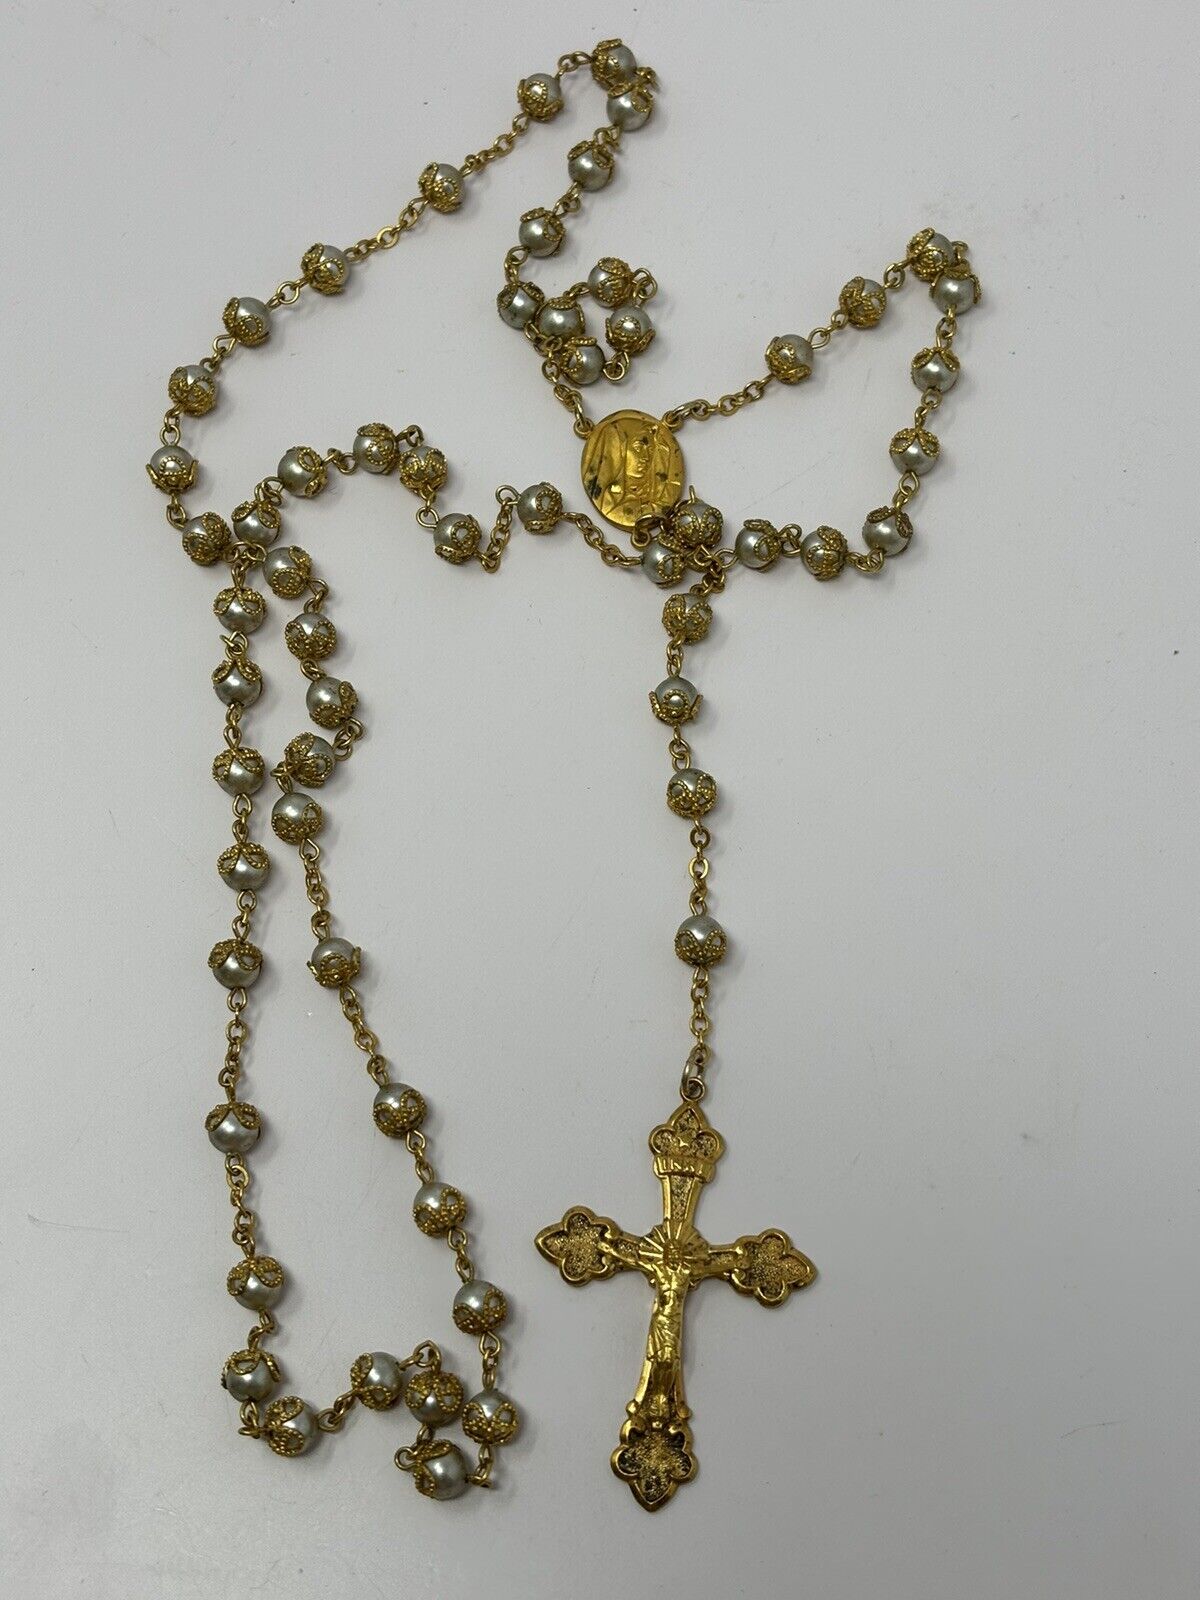 Incredible Large Vintage Gold Filled And Faux Pearl Rosary Necklace